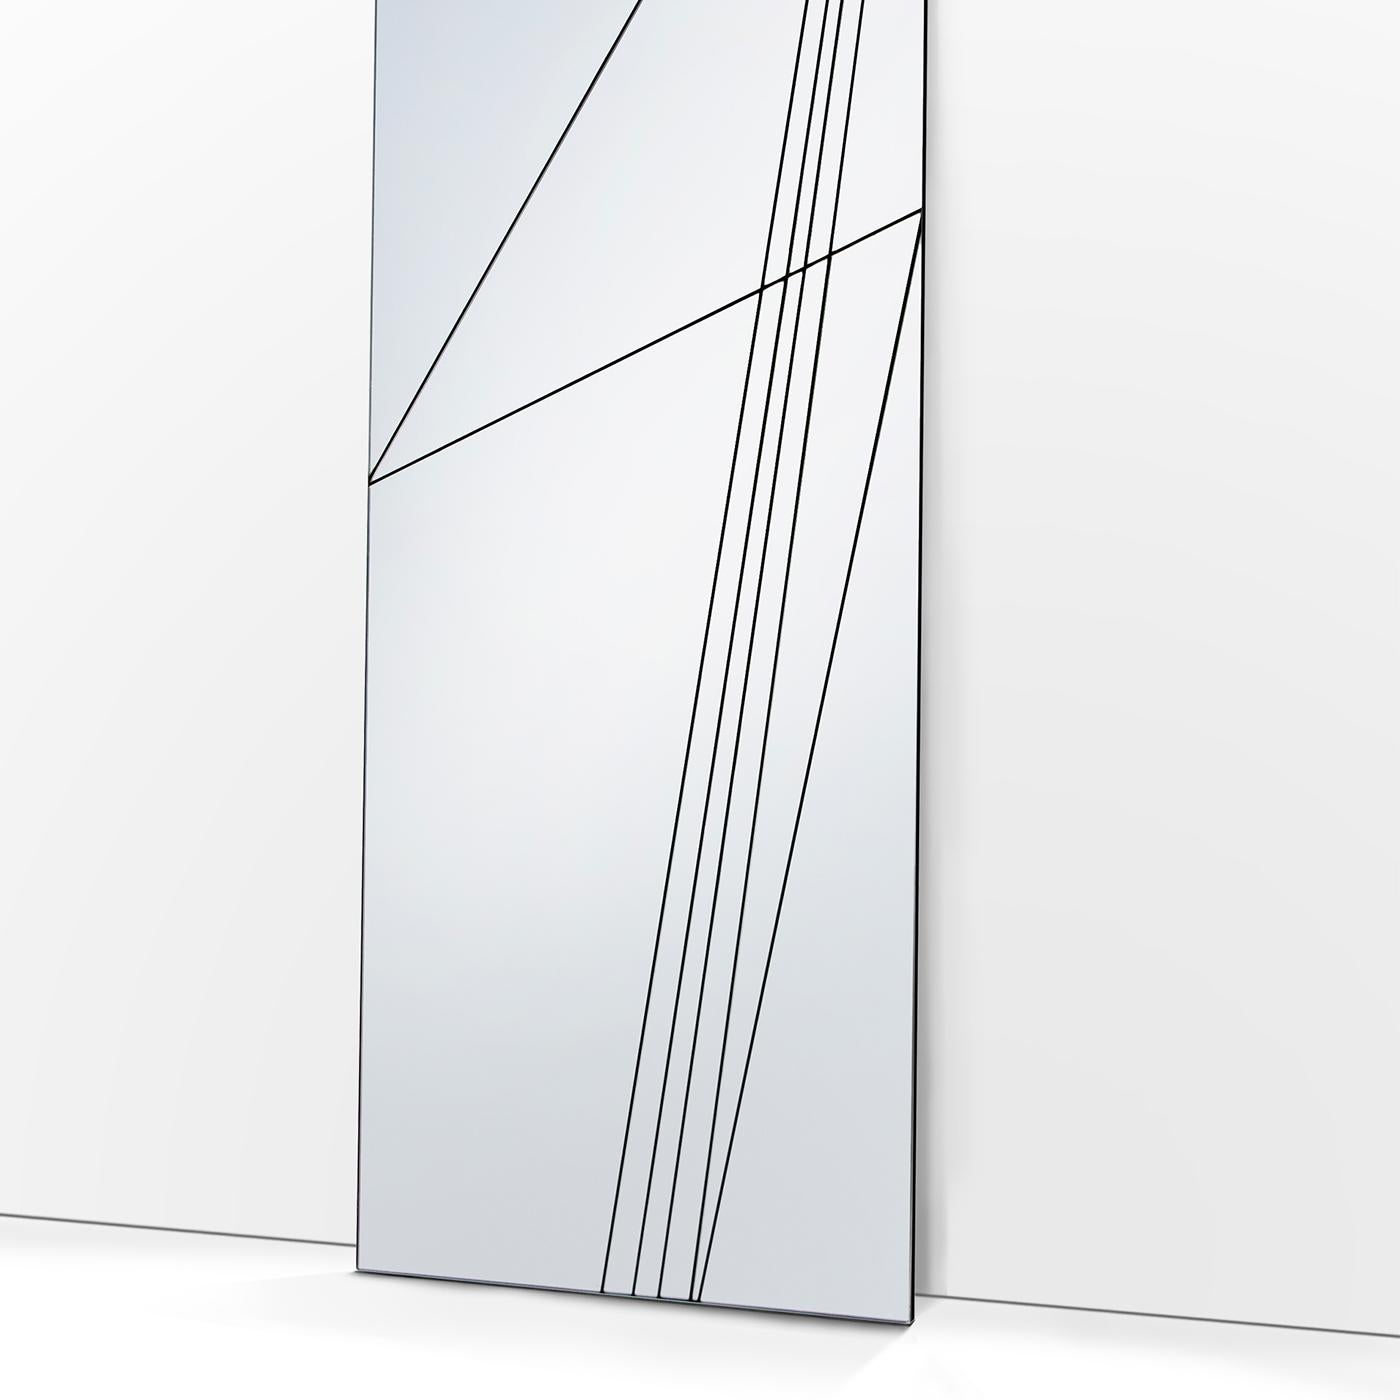 Part of the Via collection, this rectangular floor mirror creates captivating reflections with the surrounding environment. Its rigorous geometry is enlivened by a series of cuts on the surface that evoke a linear landscape reminiscent of ancient